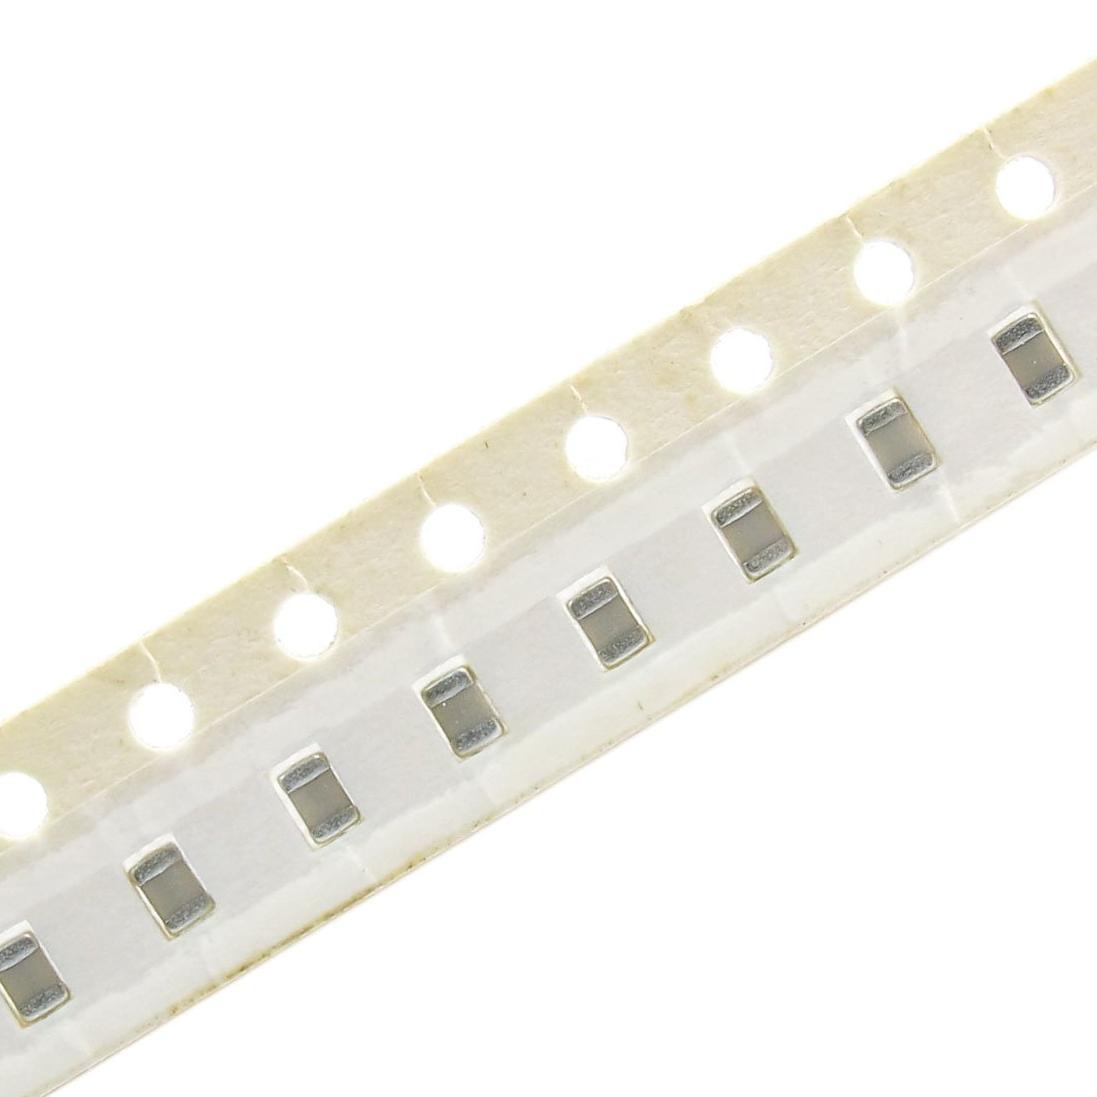  SMD 10pF 0805 C0G(NP0)